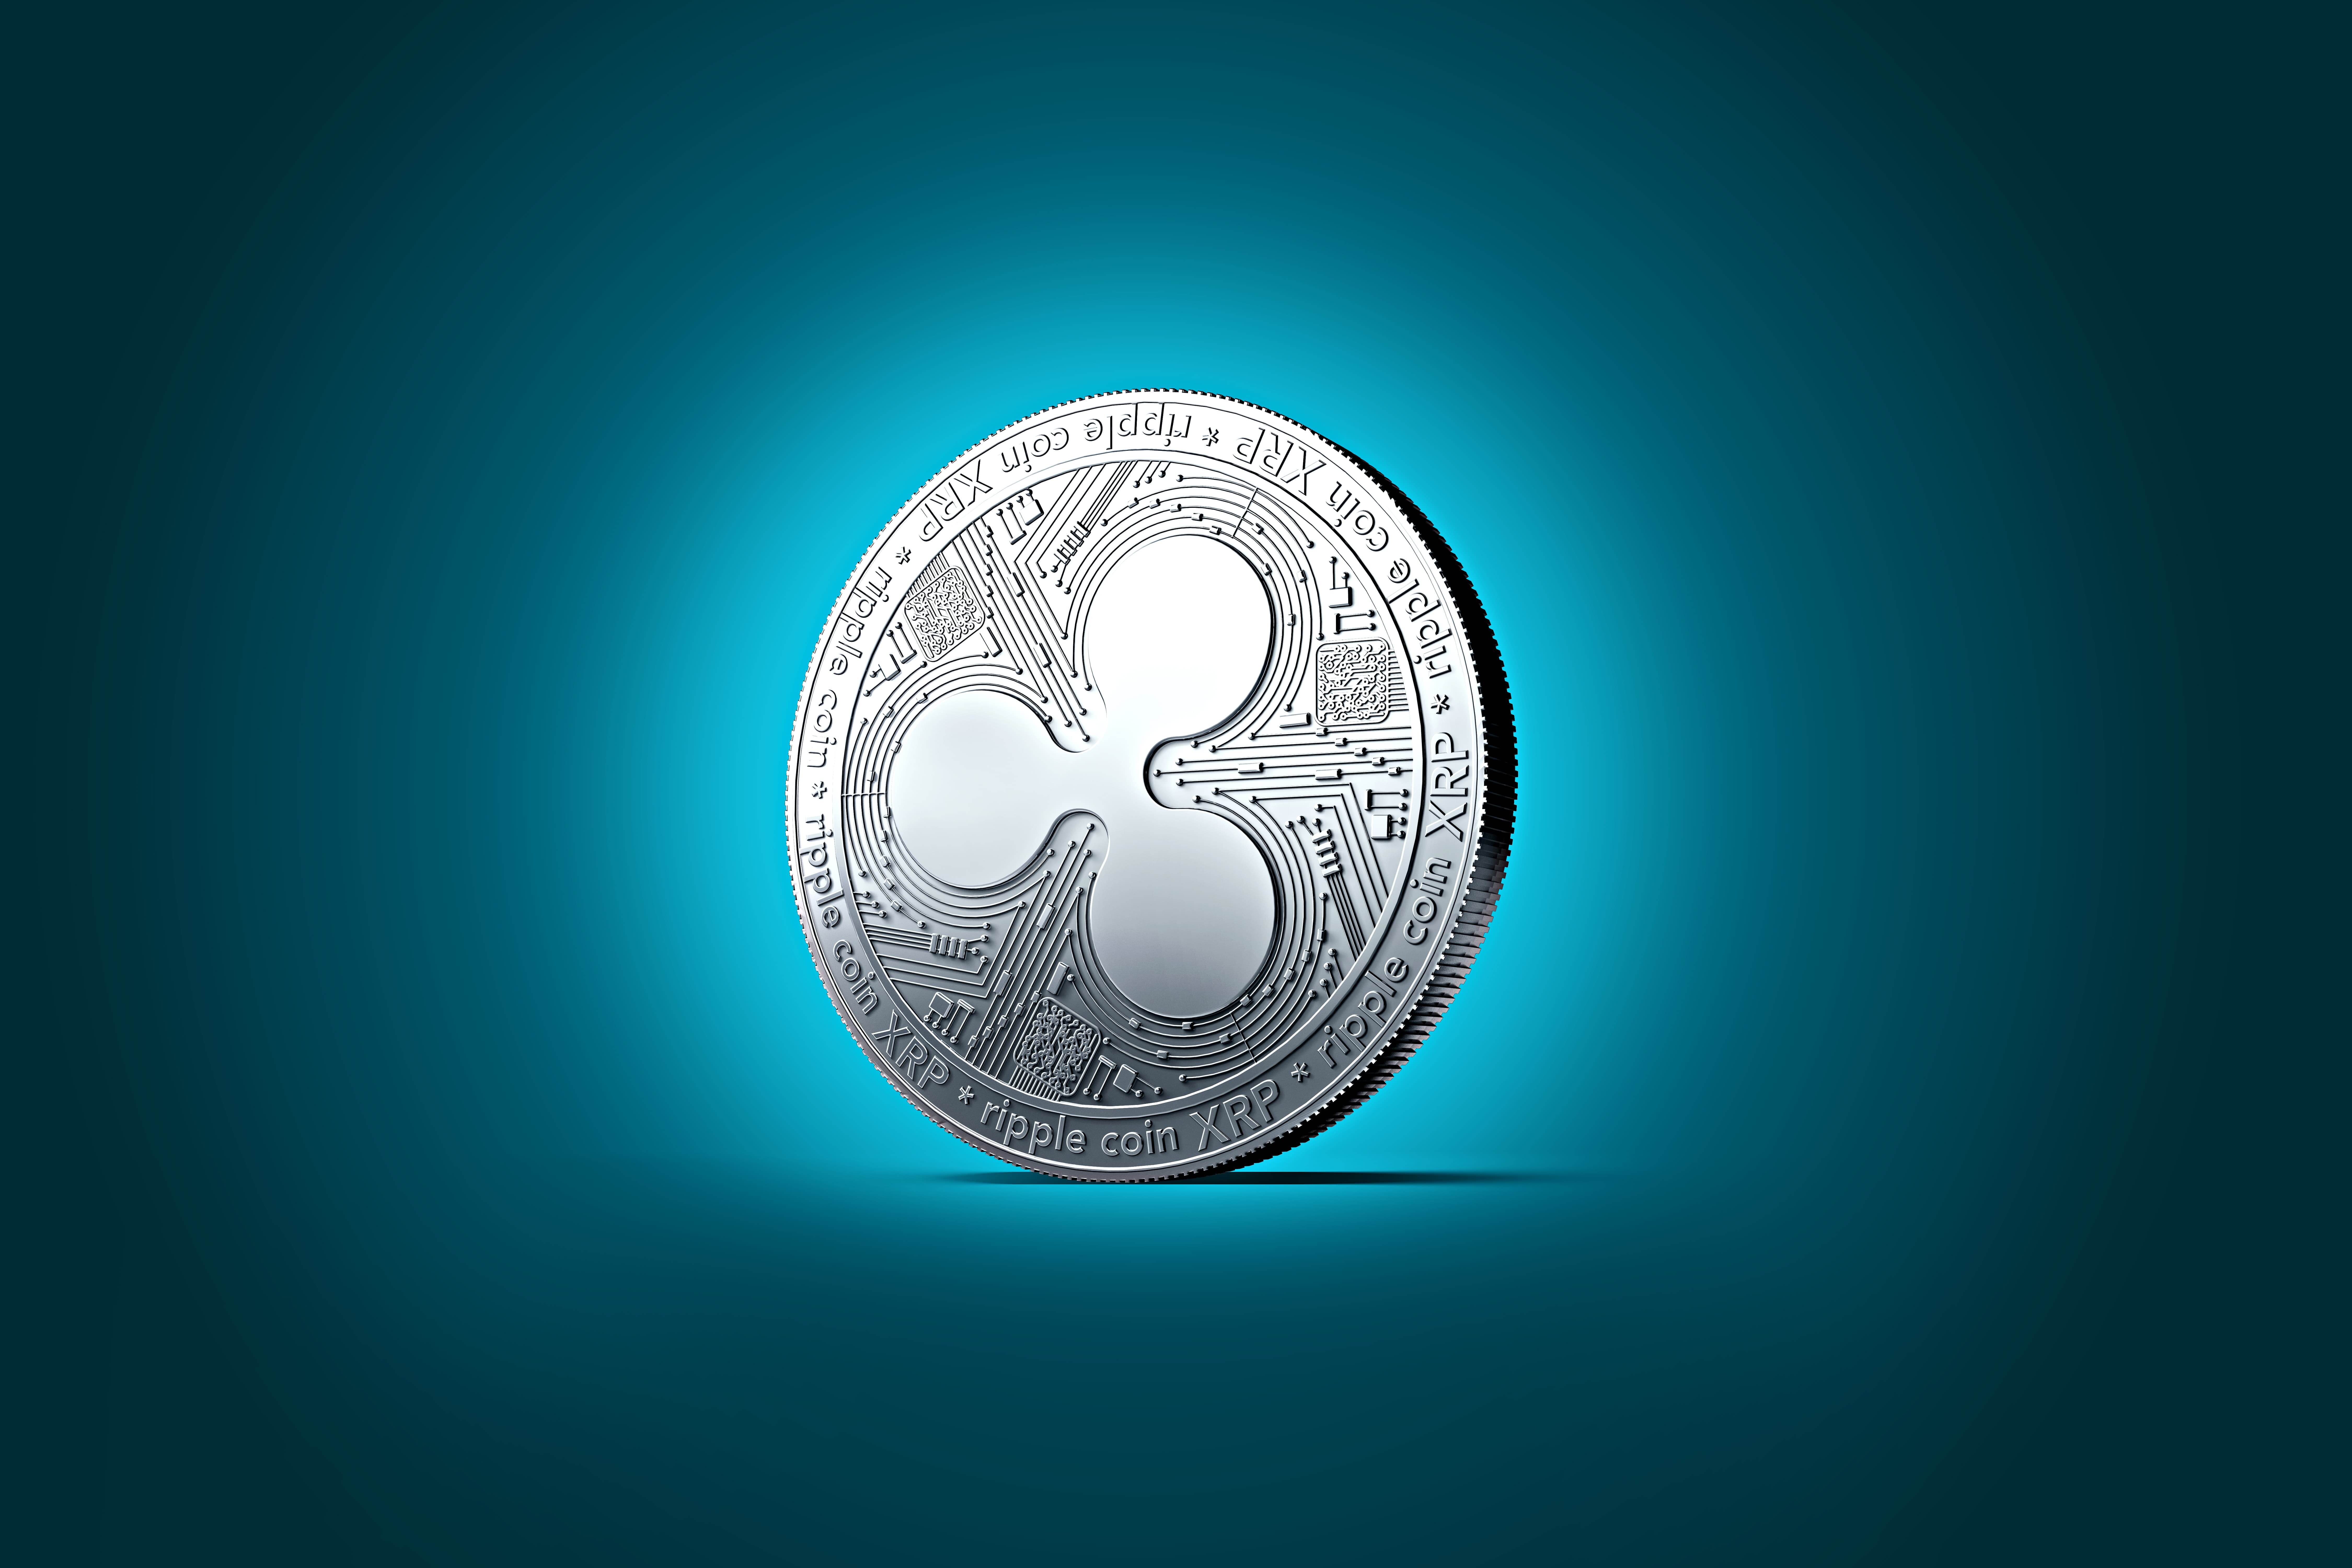 Places to buy ripple cryptocurrency bitcoin price gbtc